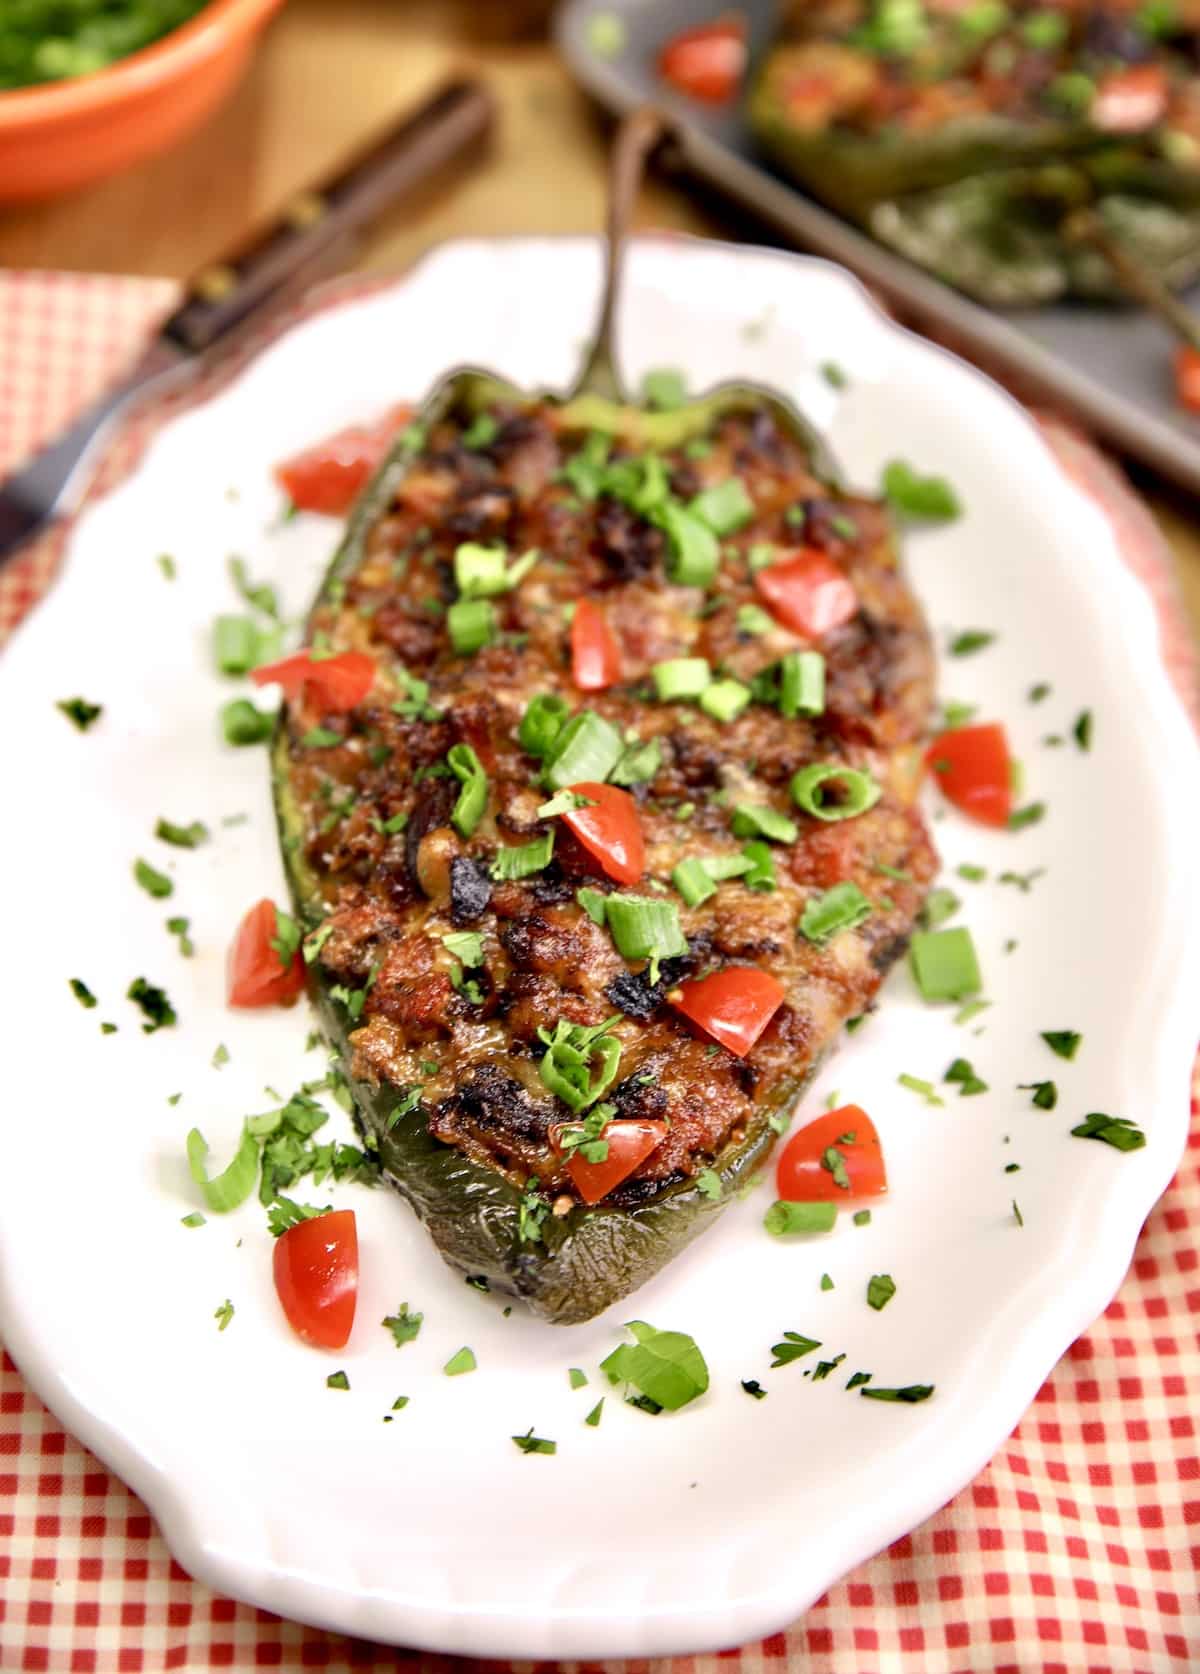 Plate with stuffed poblano pepper, tomatoes and green onions garnish.